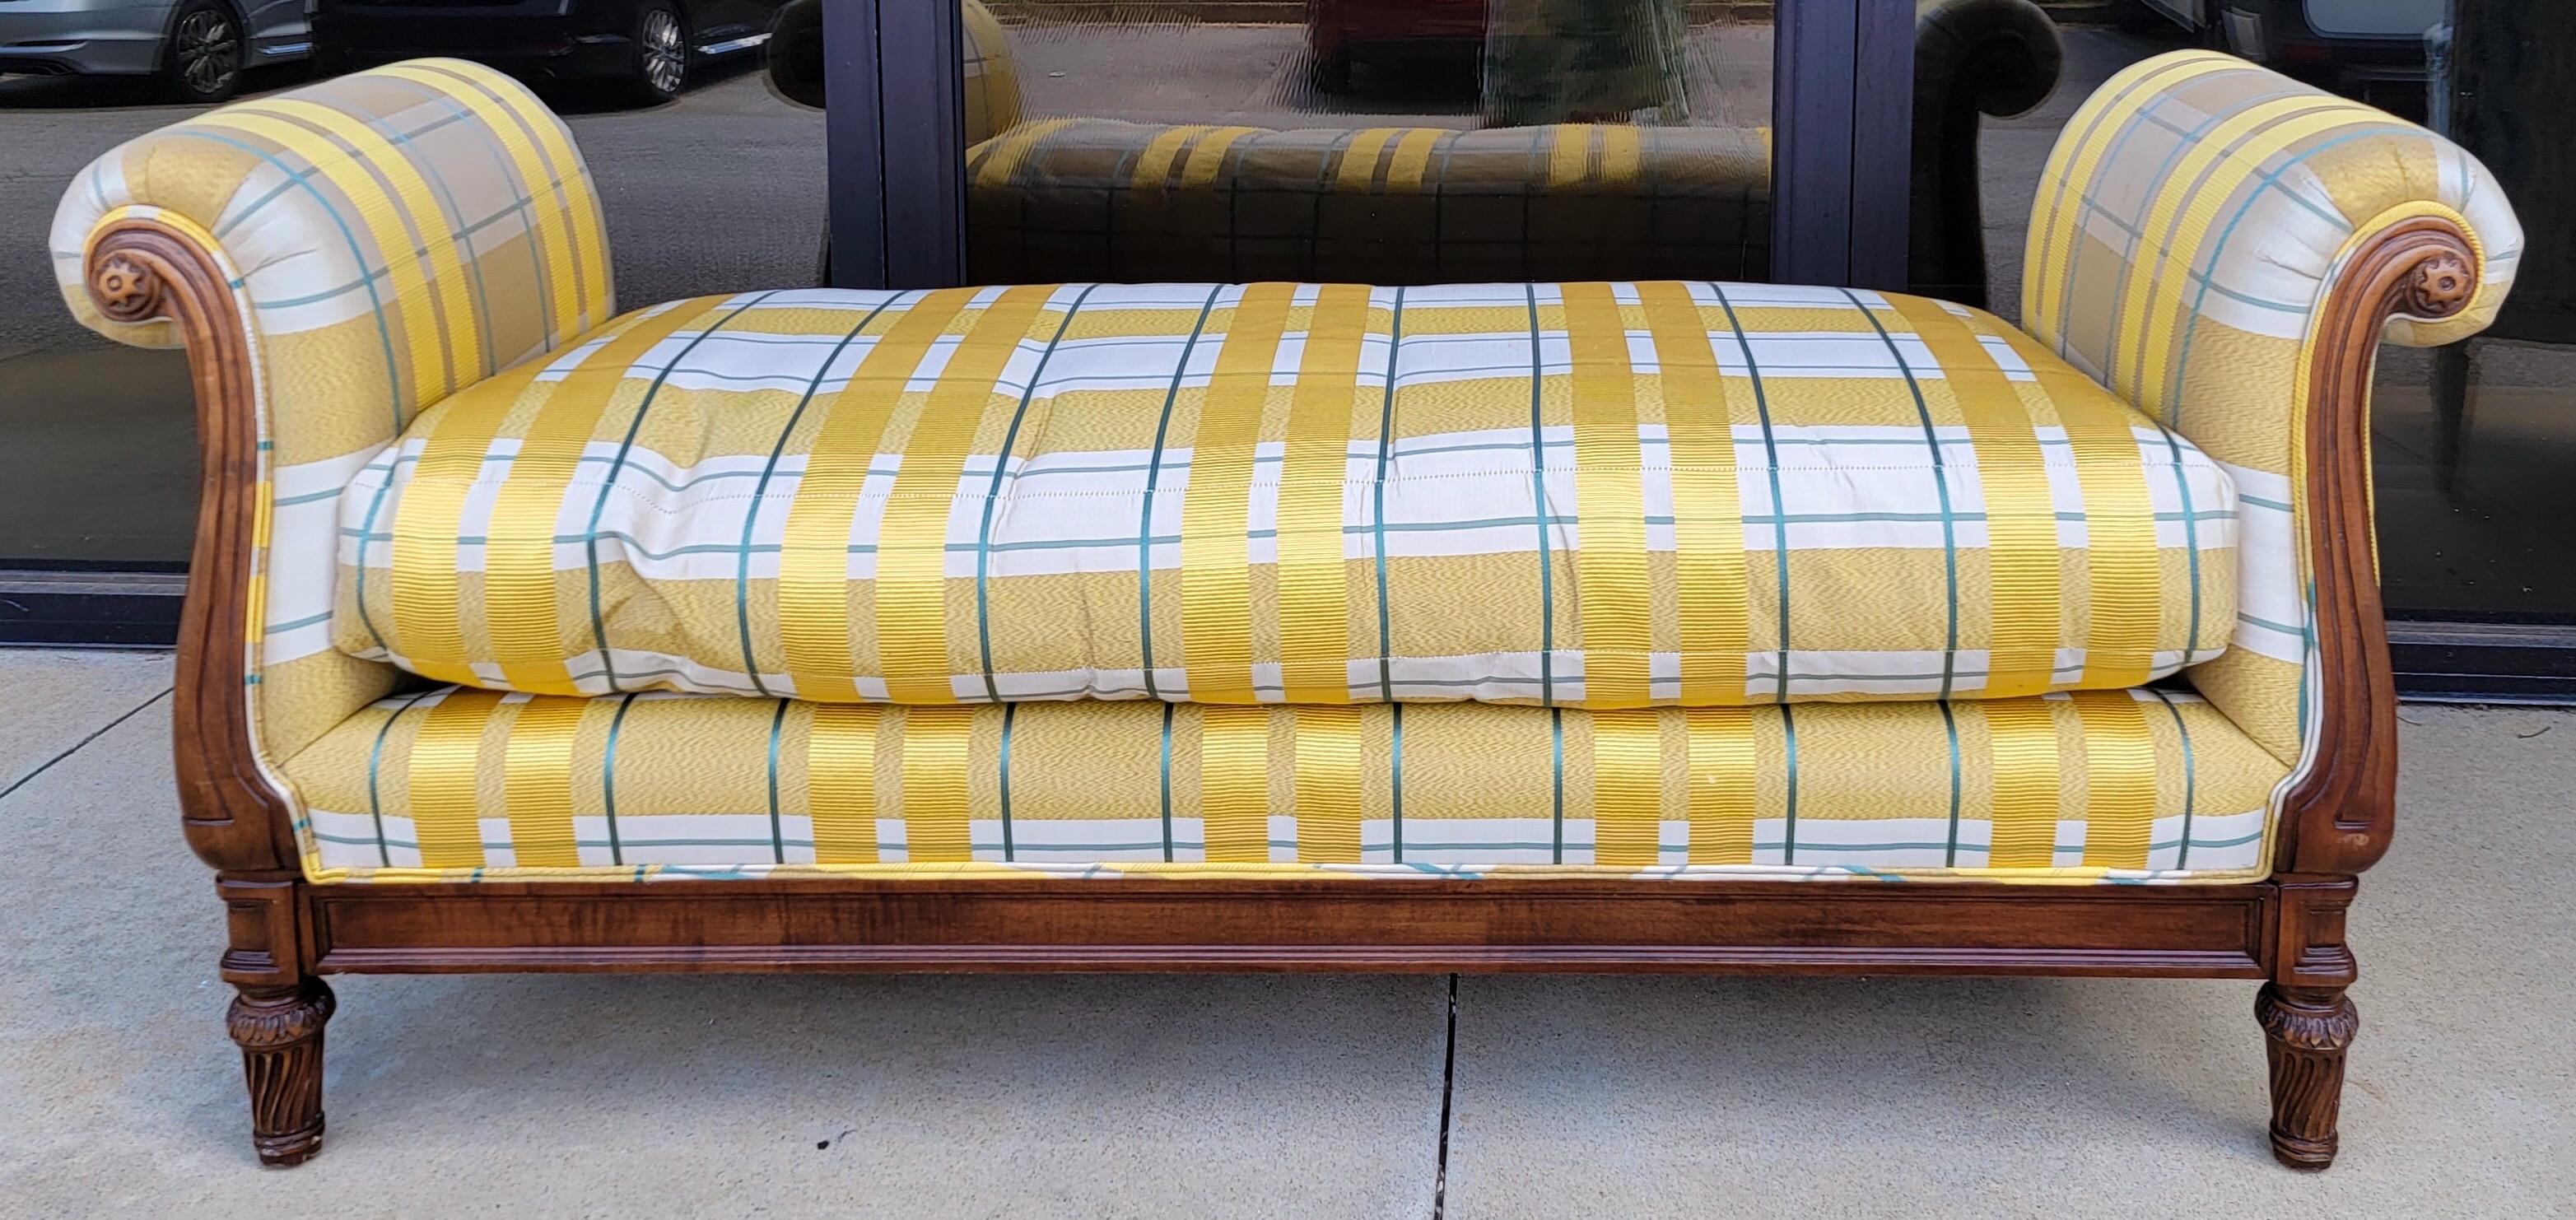 Lovely in yellow! This is a late 20th century regency style carved mahogany bench or daybed. The yellow upholstery is in wonderful condition. The frame may have a little more age. The Mike Bell label is most likely the design firm. 

My shipping is